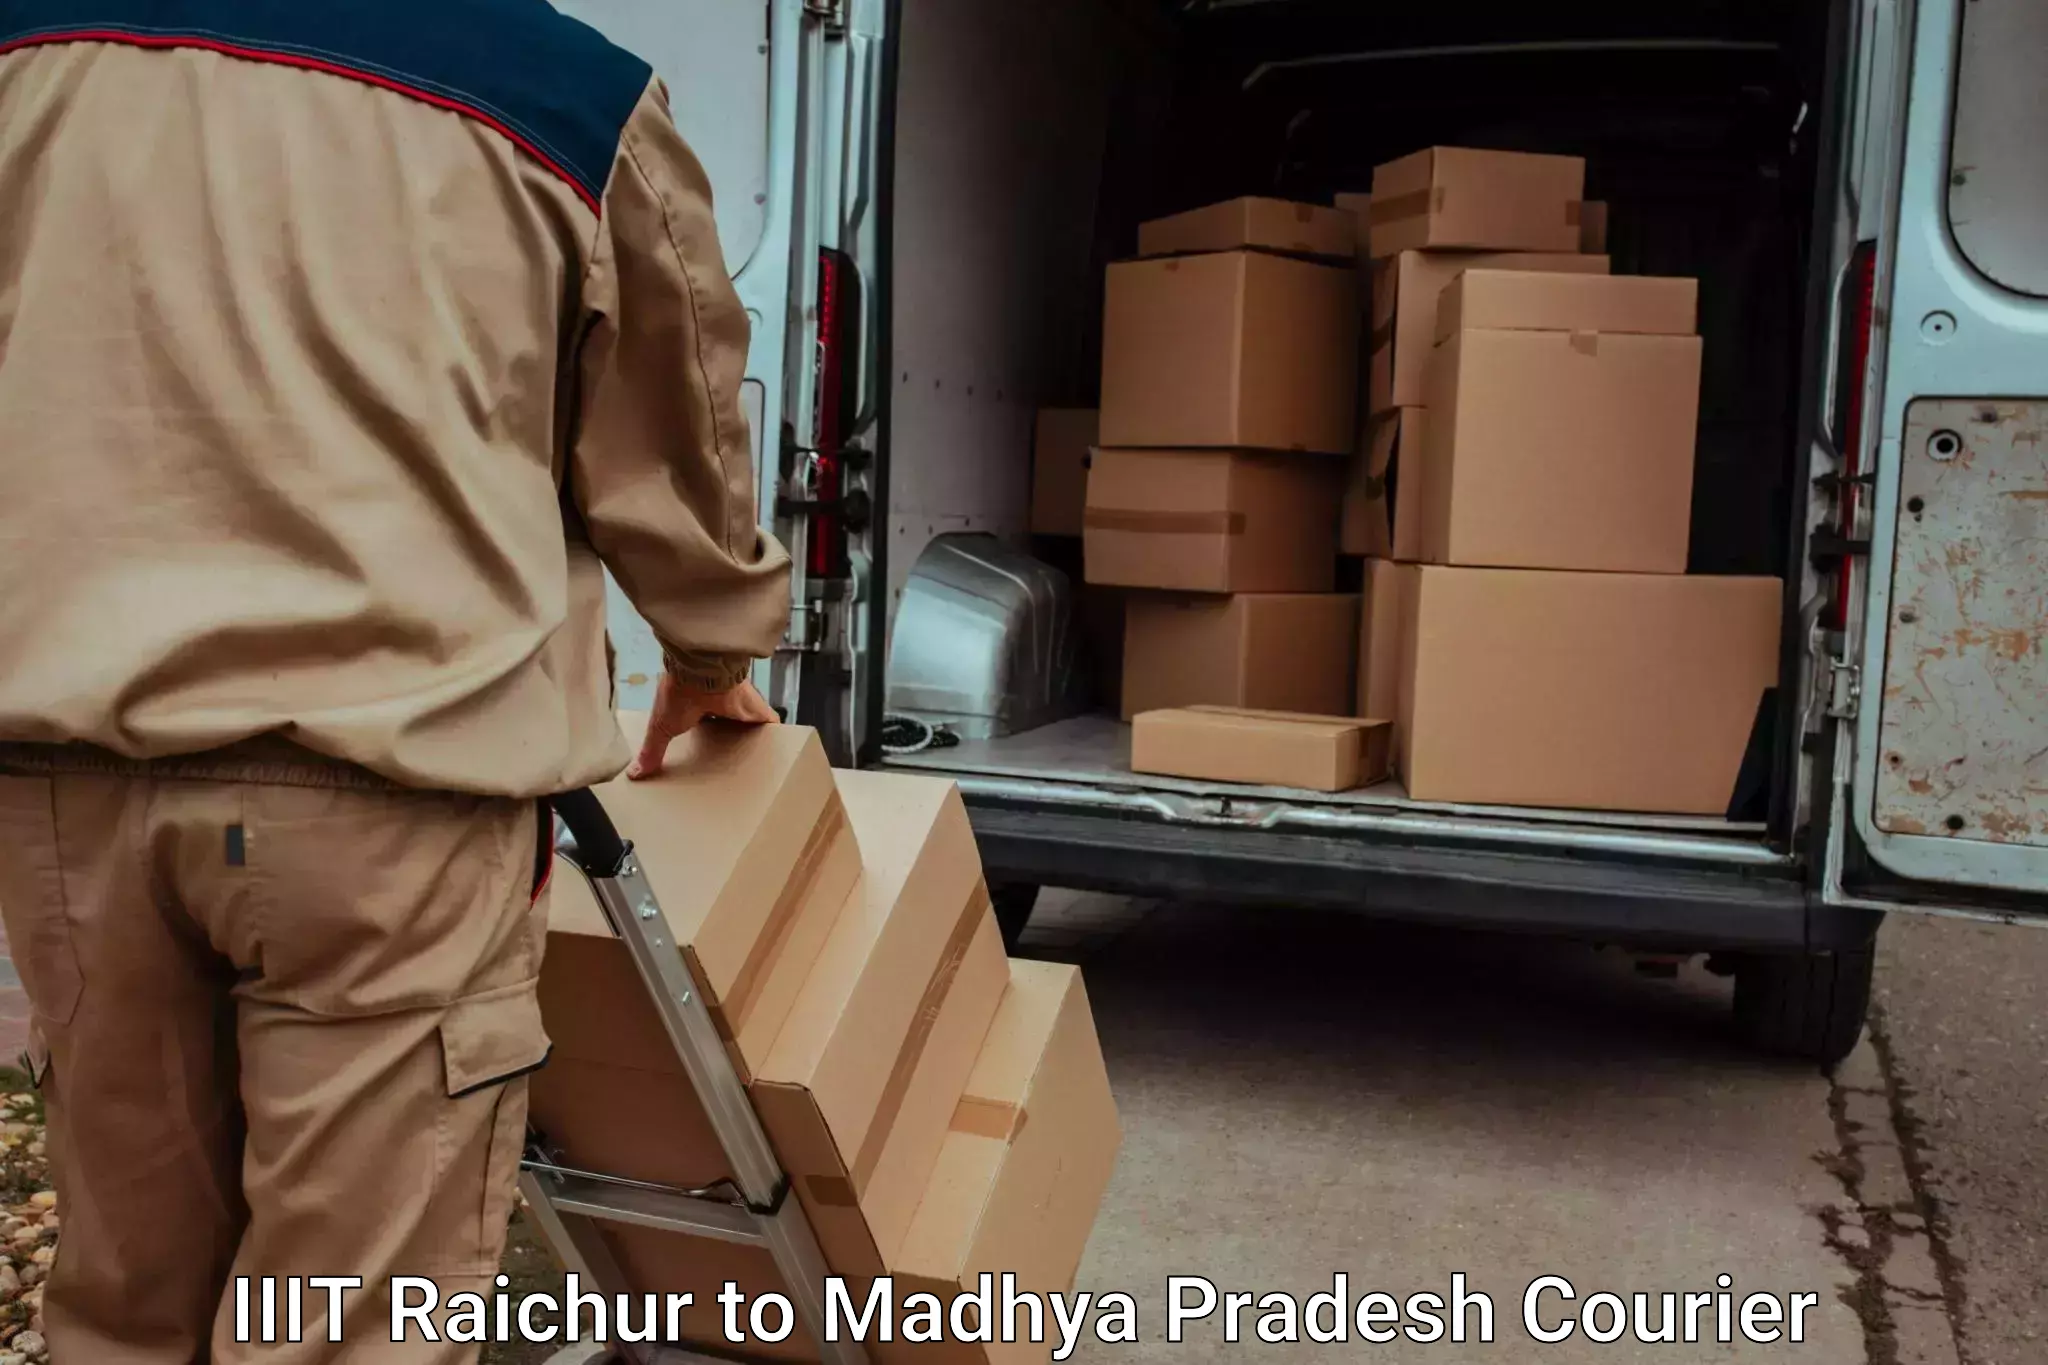 Express luggage delivery IIIT Raichur to Indore